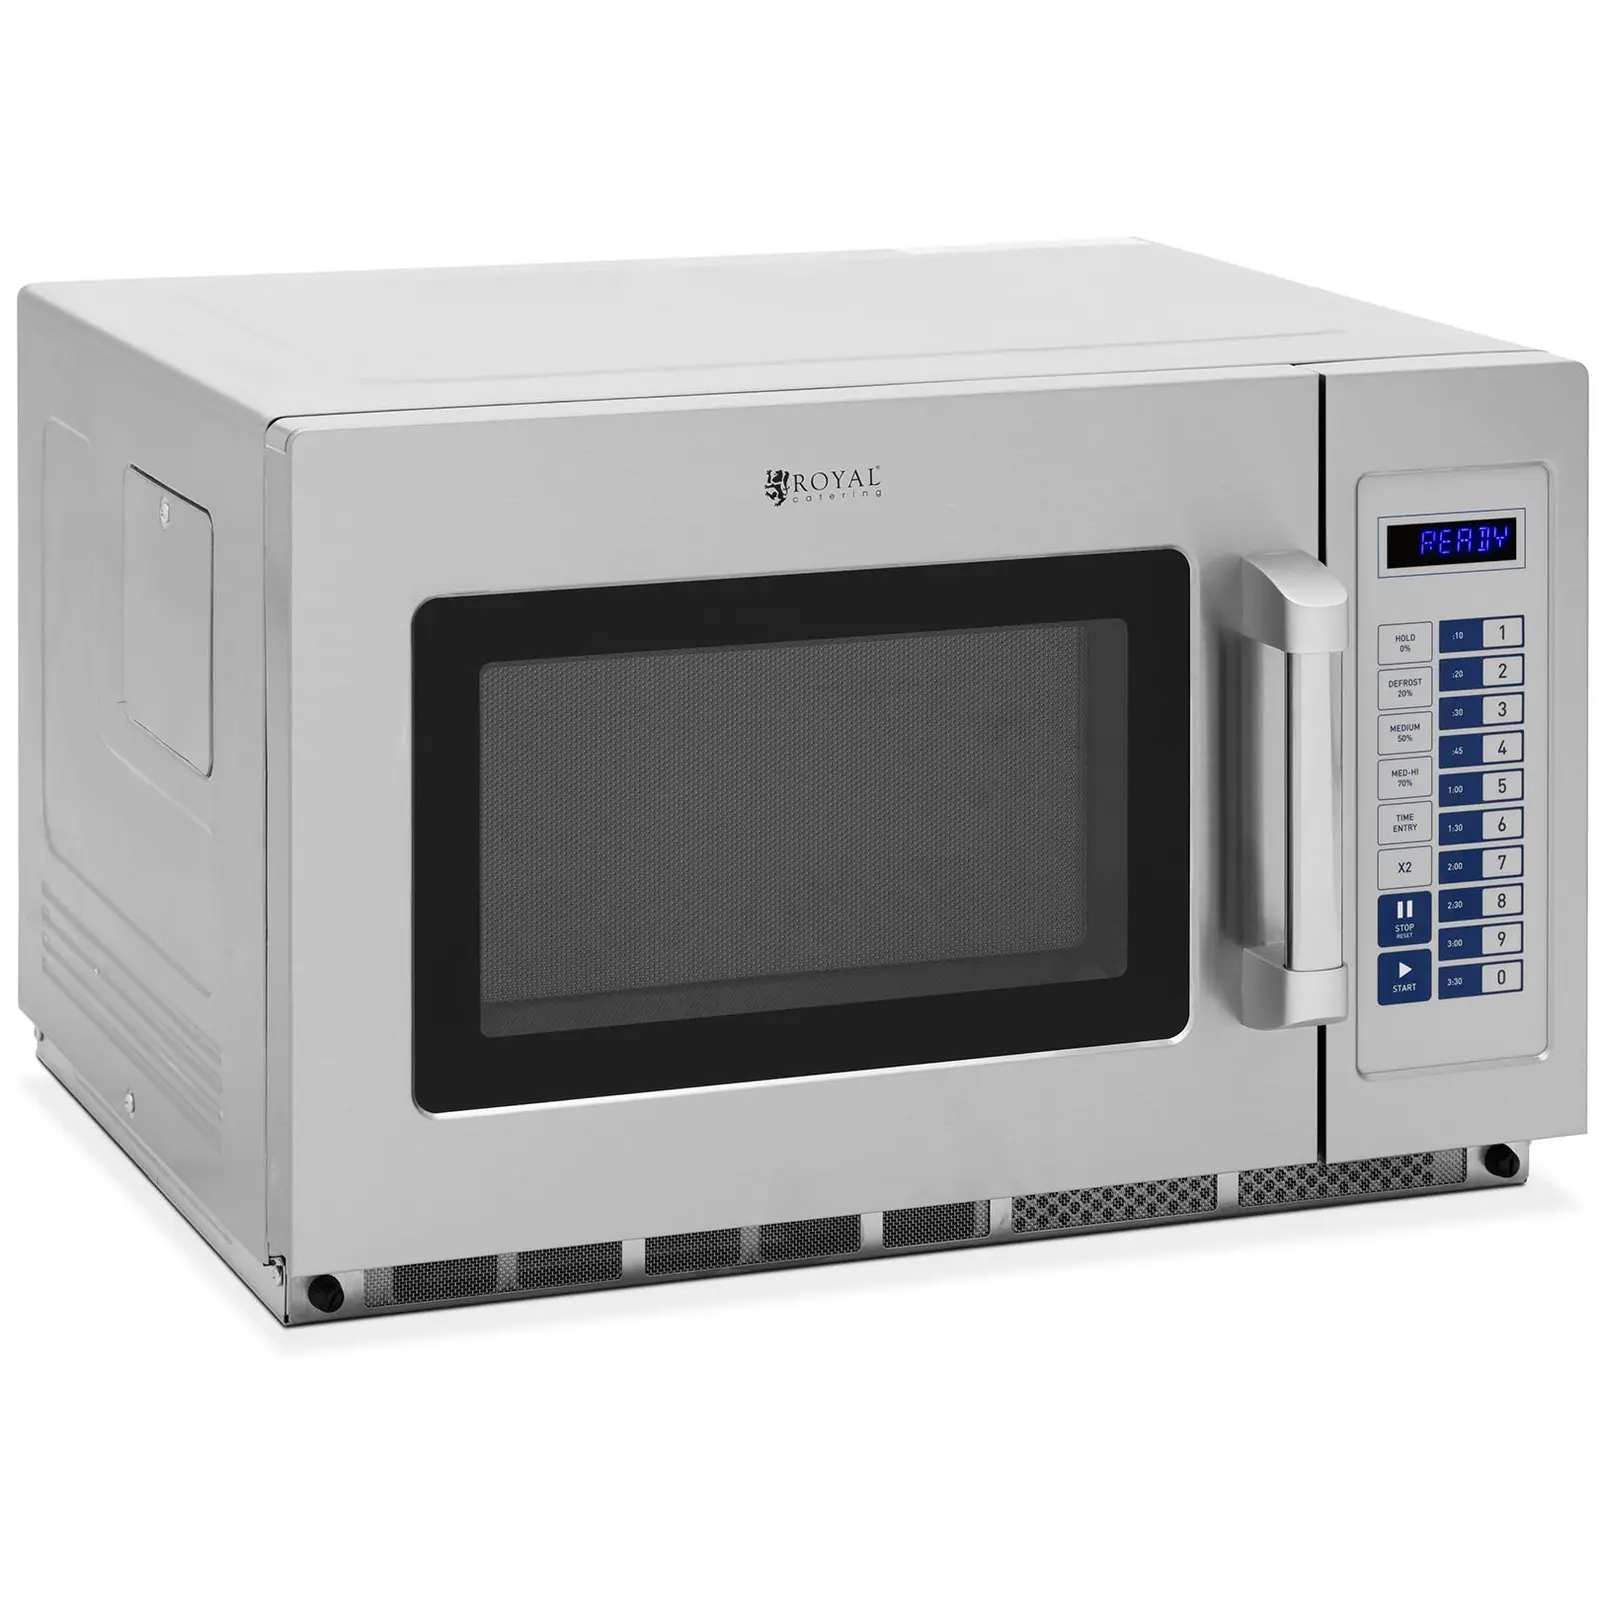 Microwave - 3200 W - 34 L - Royal Catering